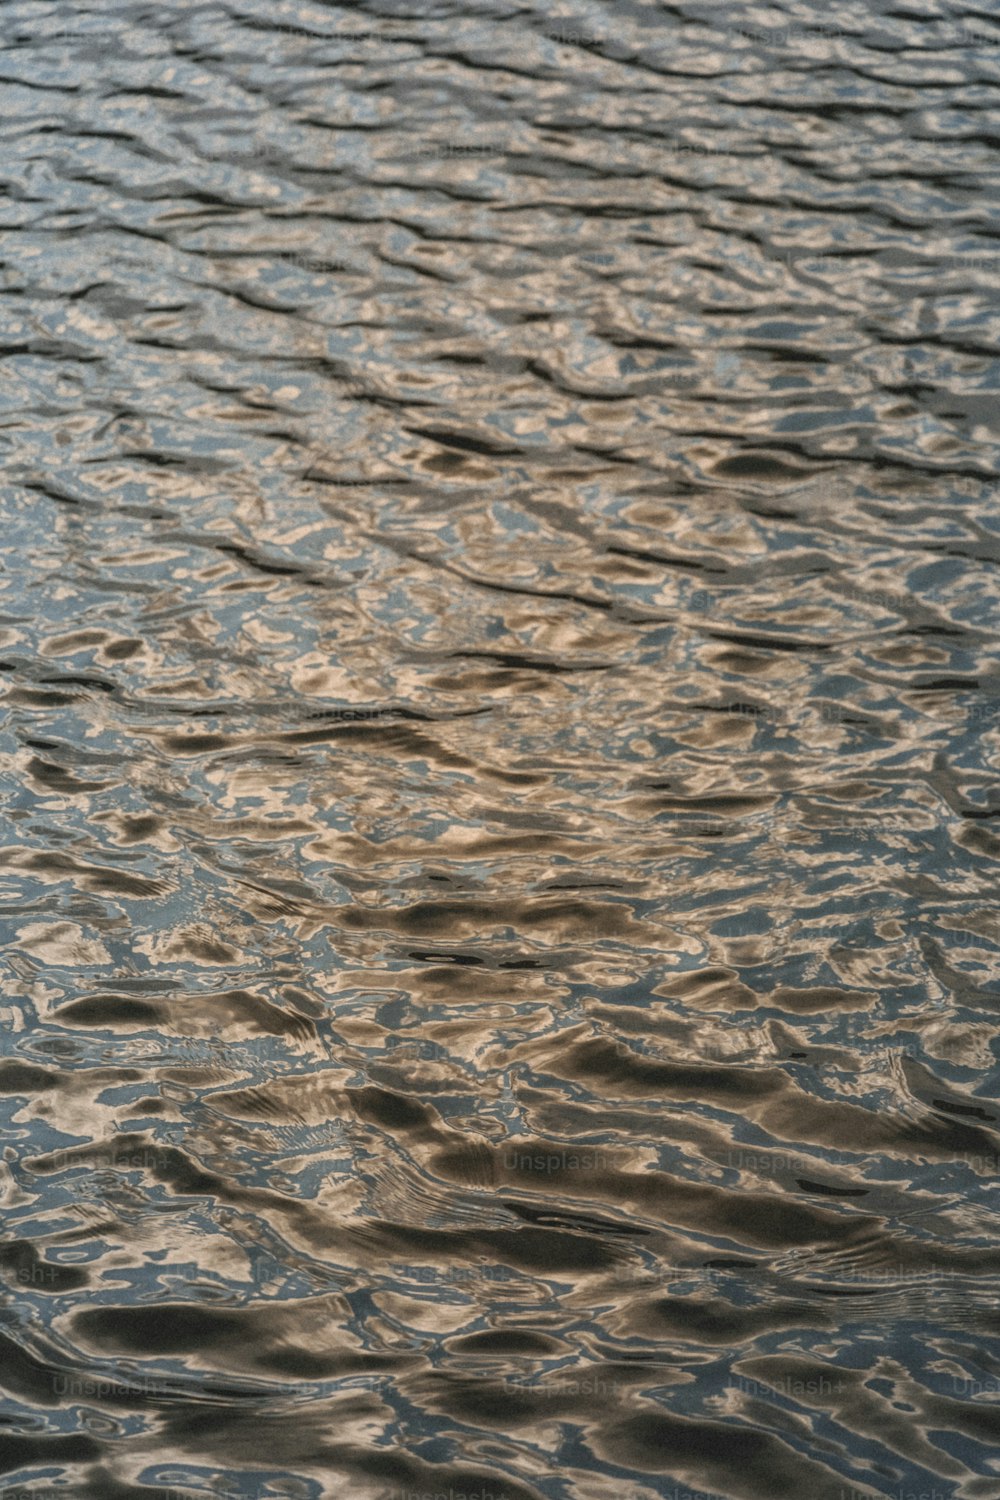 a large body of water with ripples on it